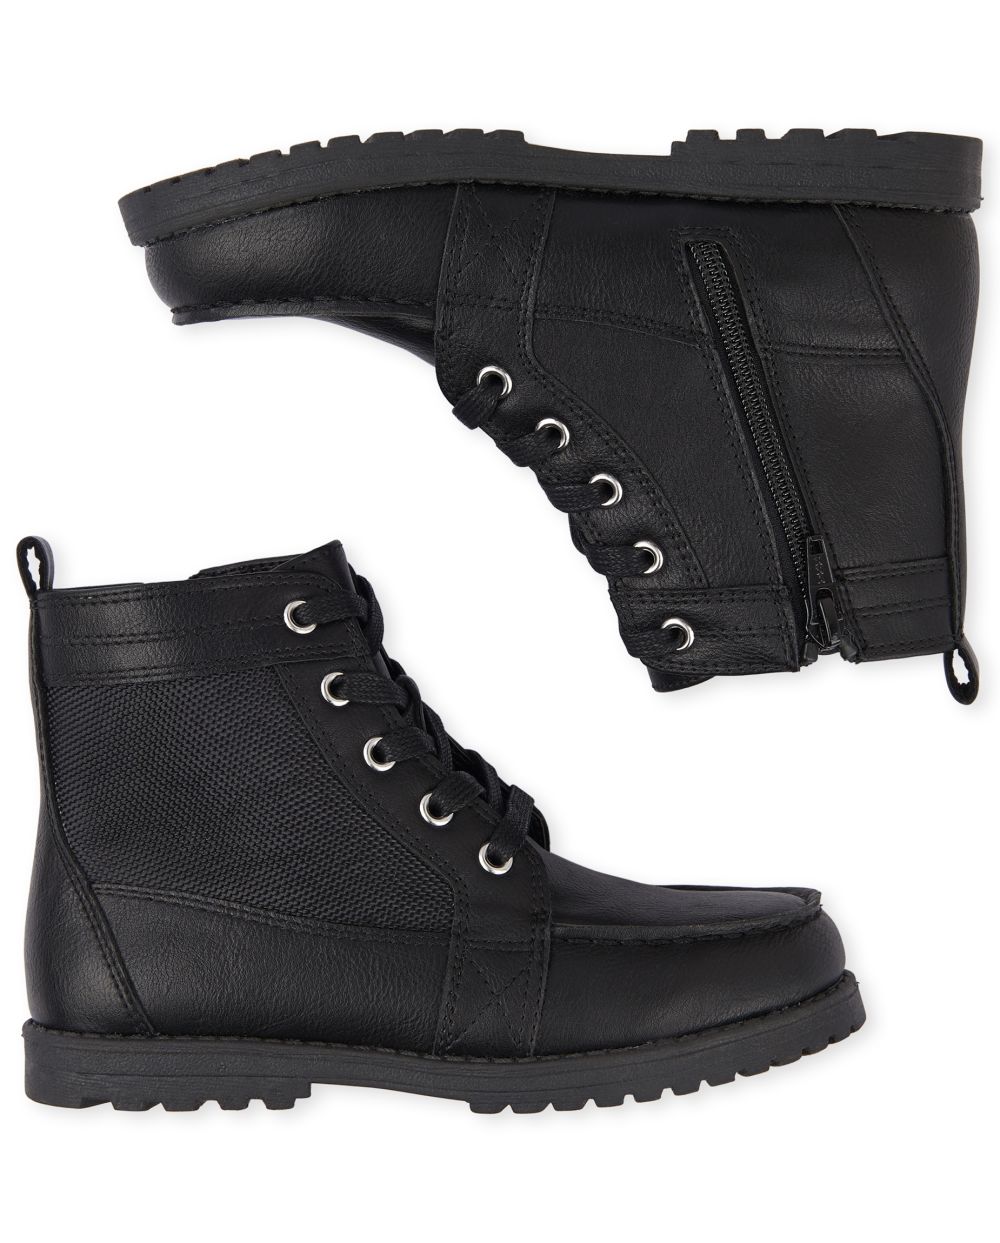 Boys Christmas Faux Leather Lace Up Boots